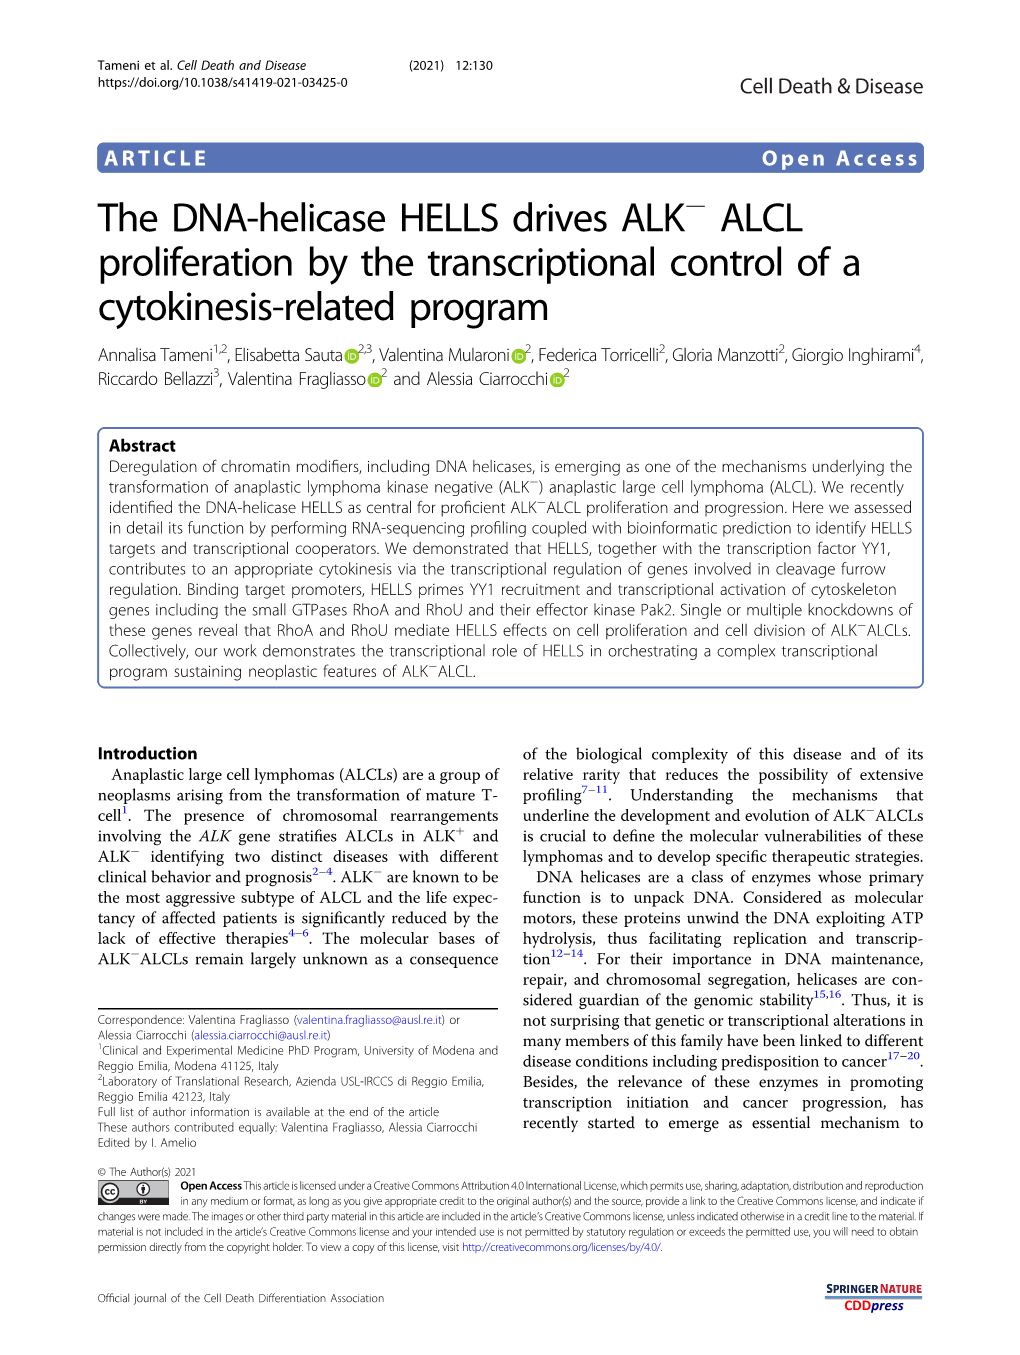 The DNA-Helicase HELLS Drives ALK− ALCL Proliferation By